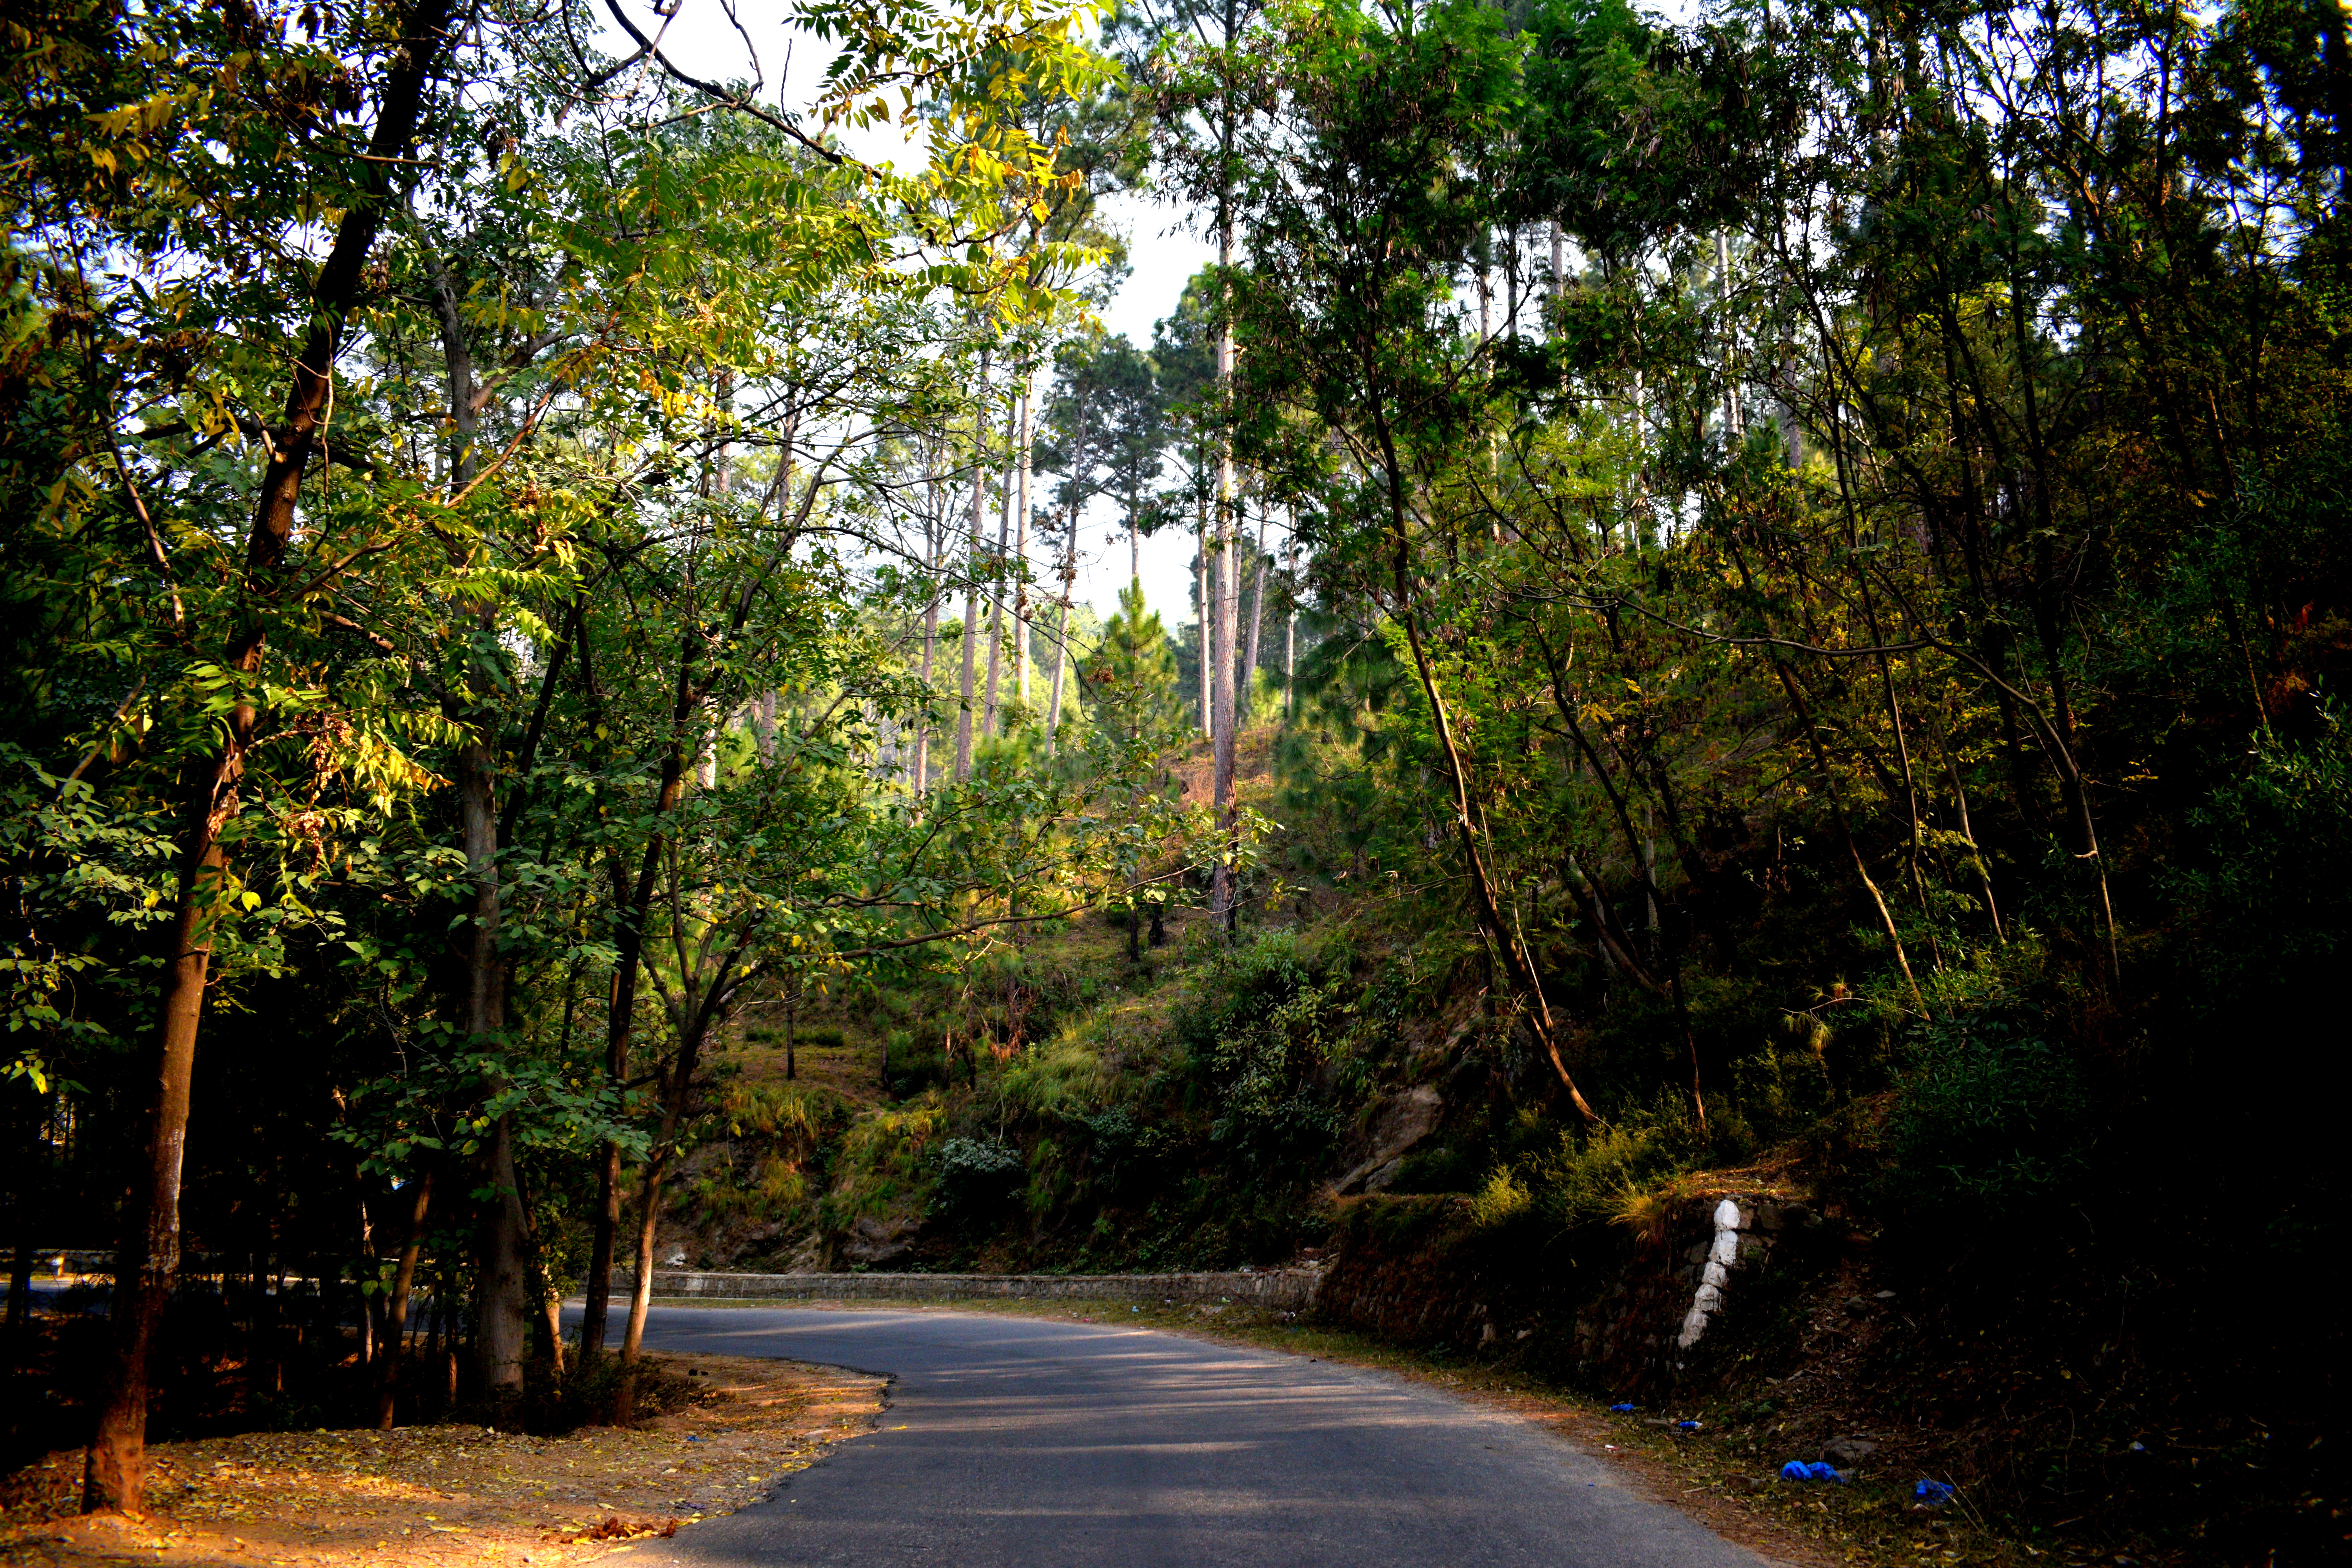 File:A small road and around green trees.jpg - Wikimedia Commons